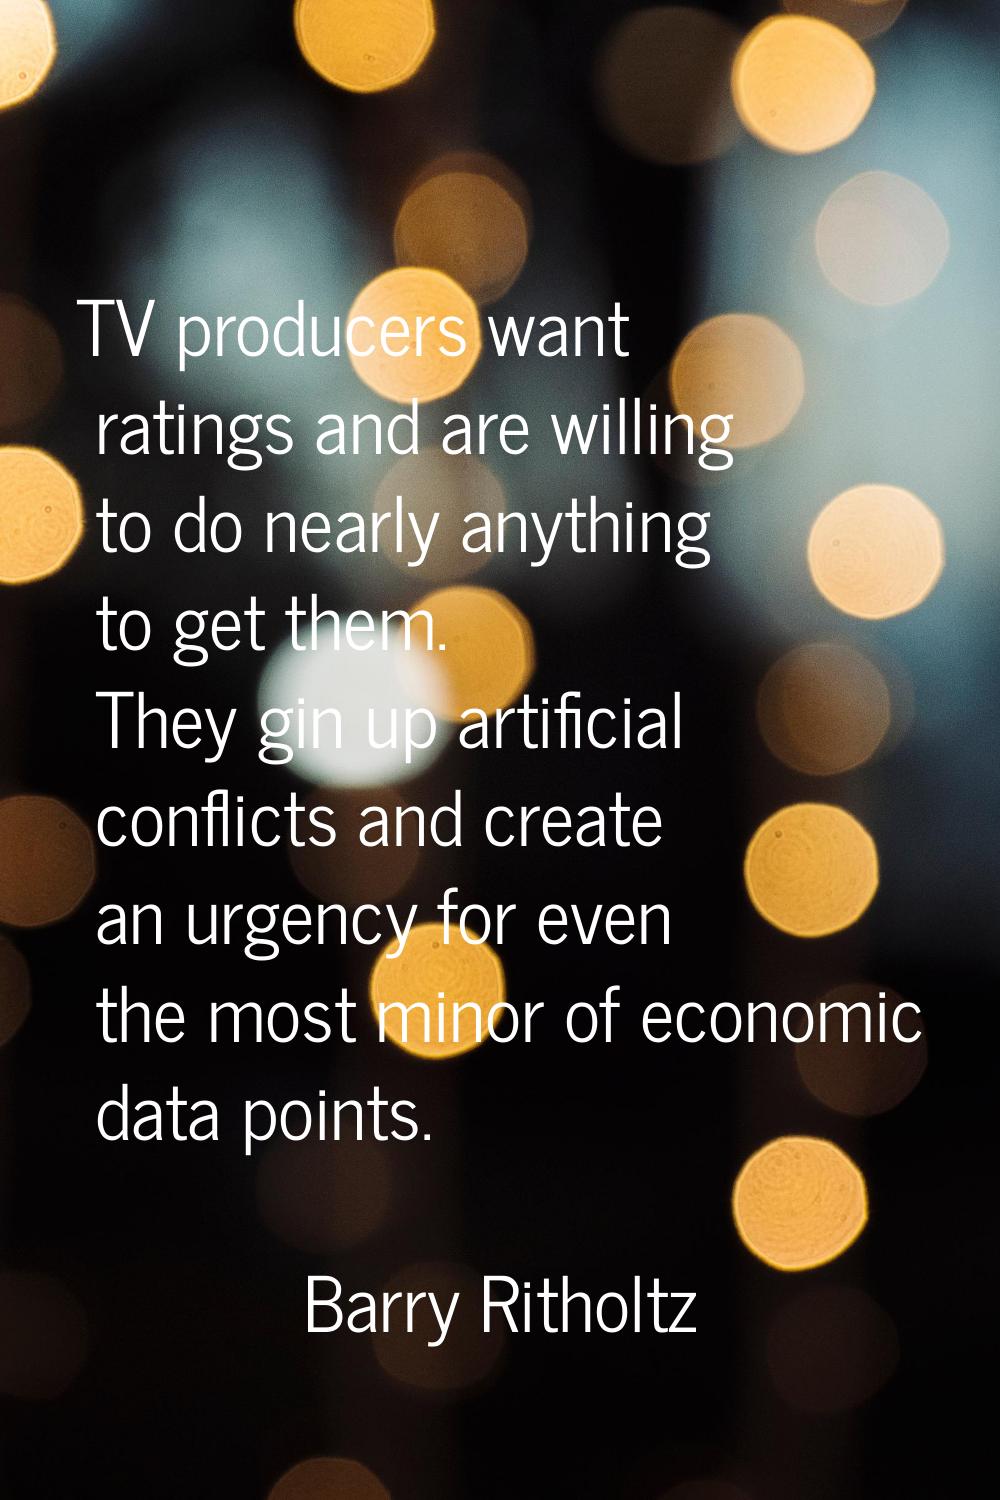 TV producers want ratings and are willing to do nearly anything to get them. They gin up artificial